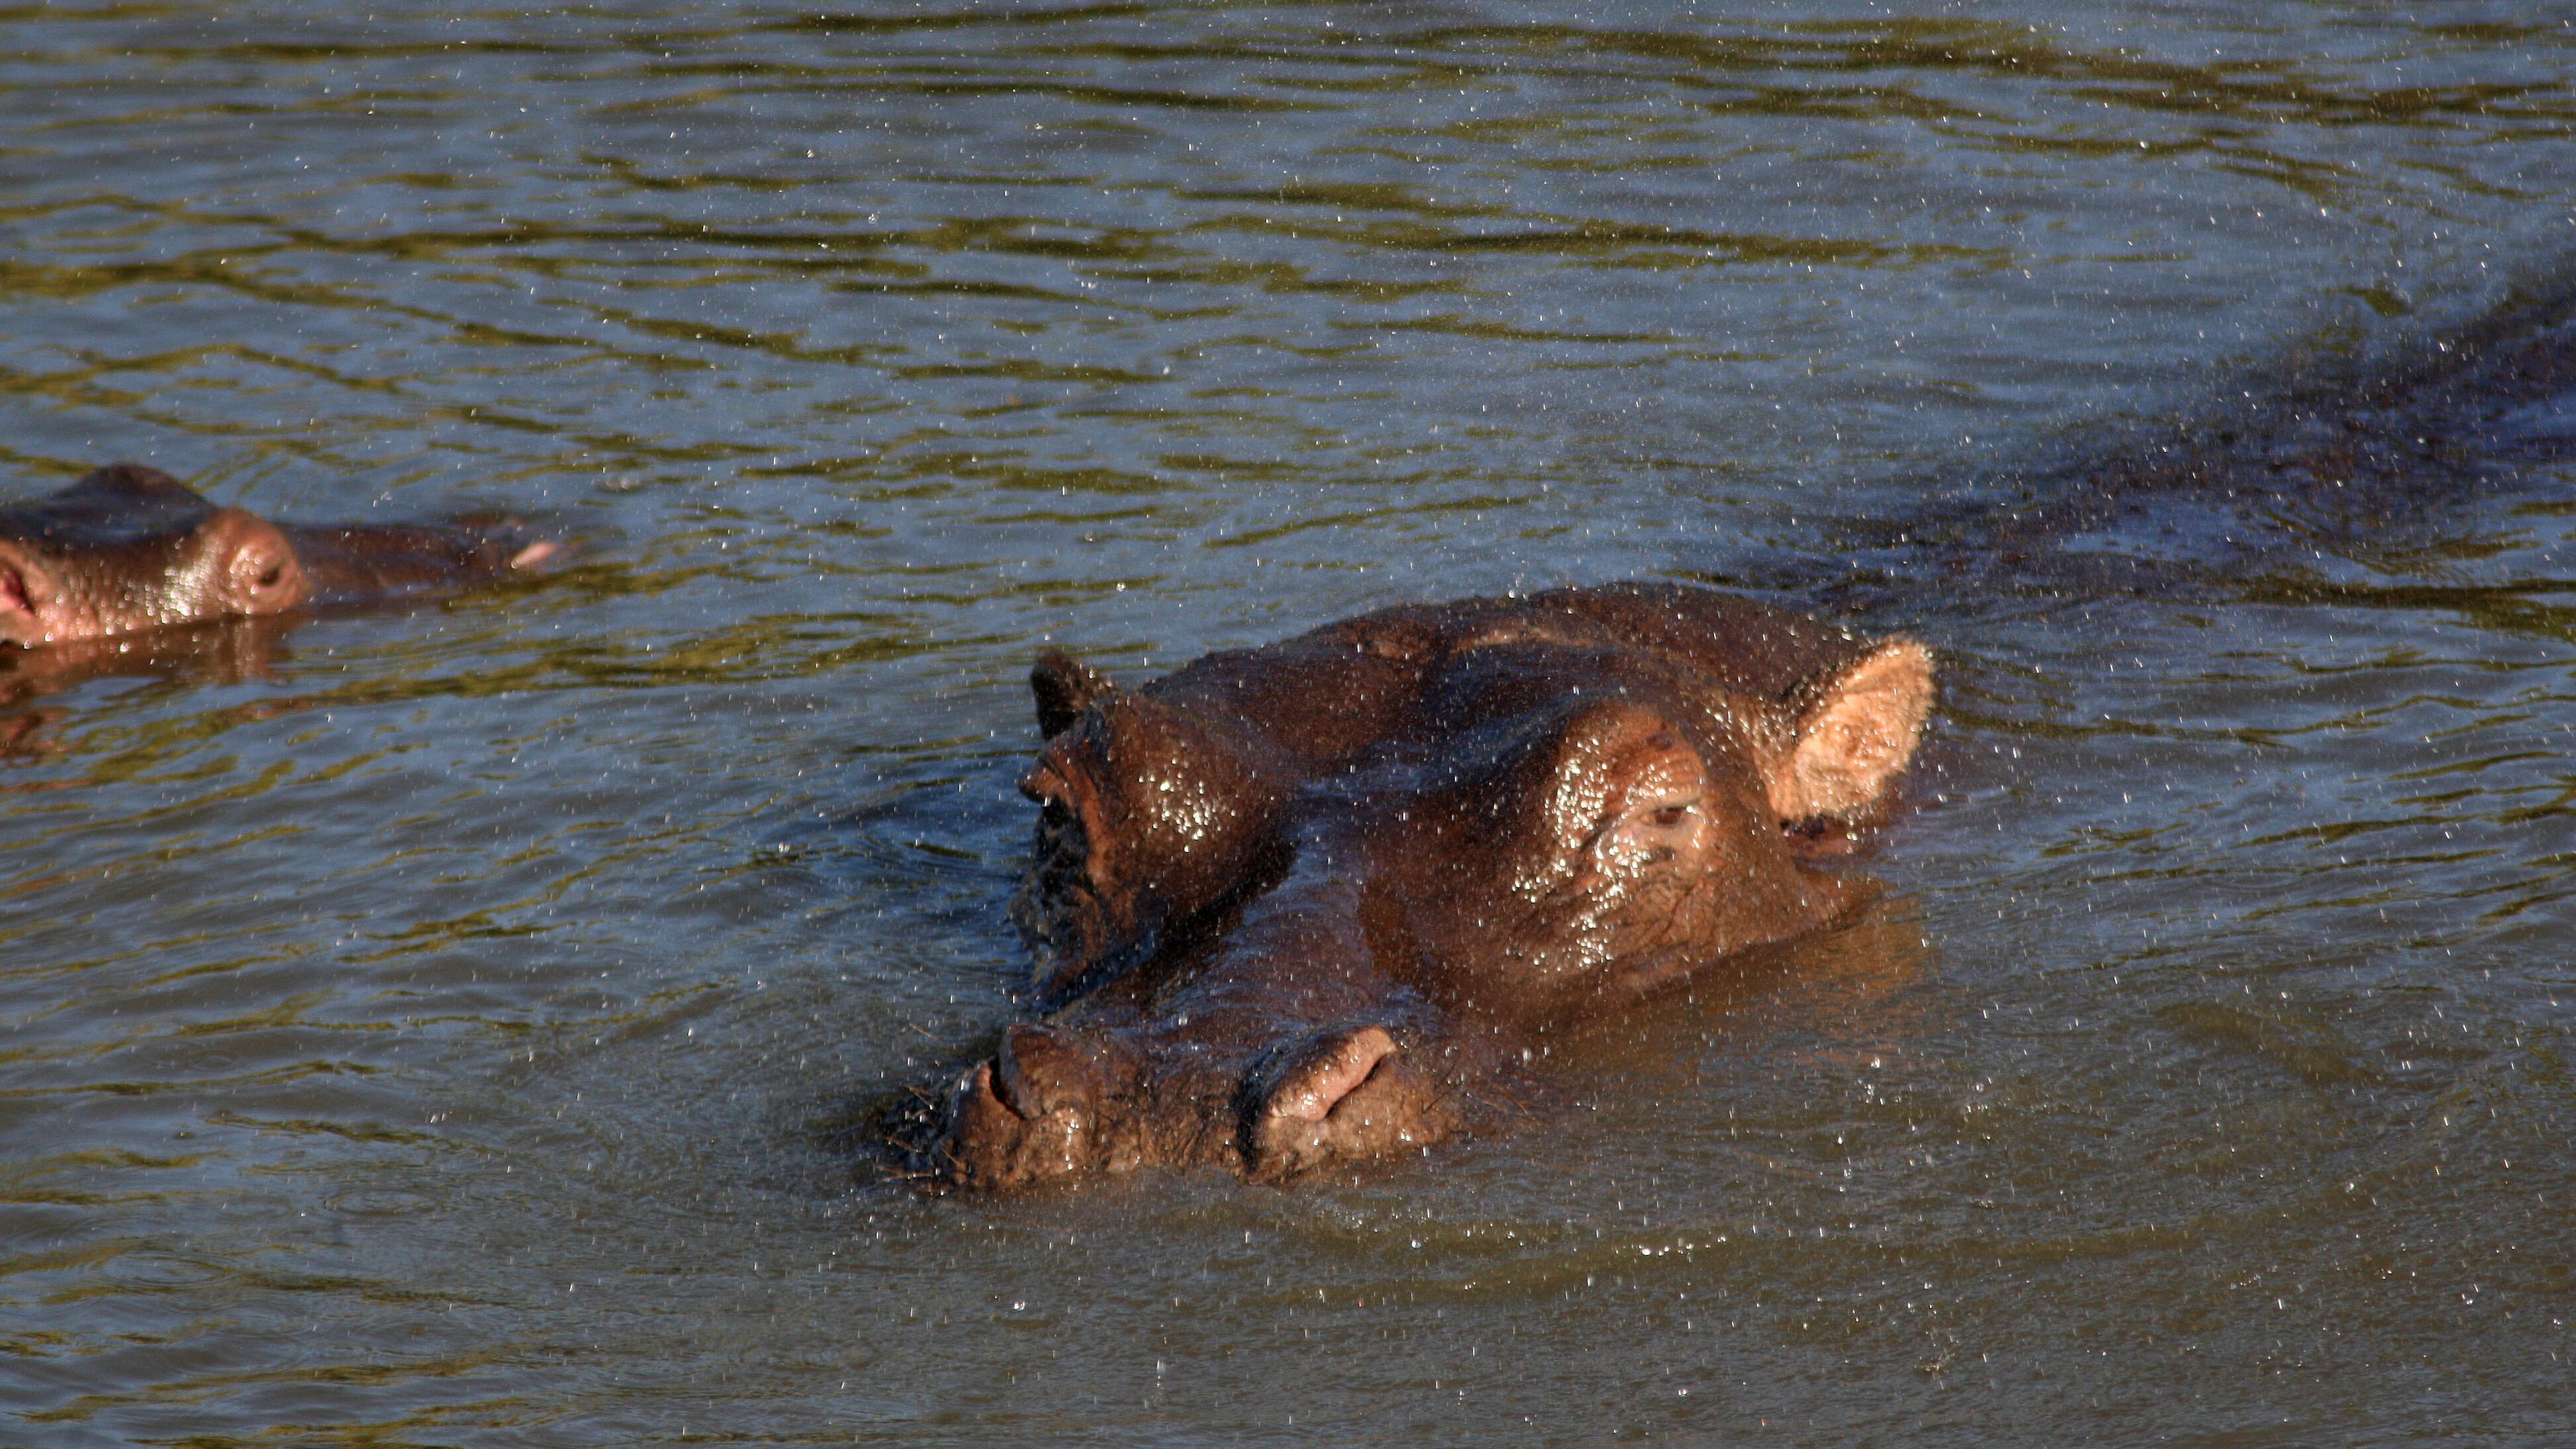 Trotting hippos can become airborne, scientists have said